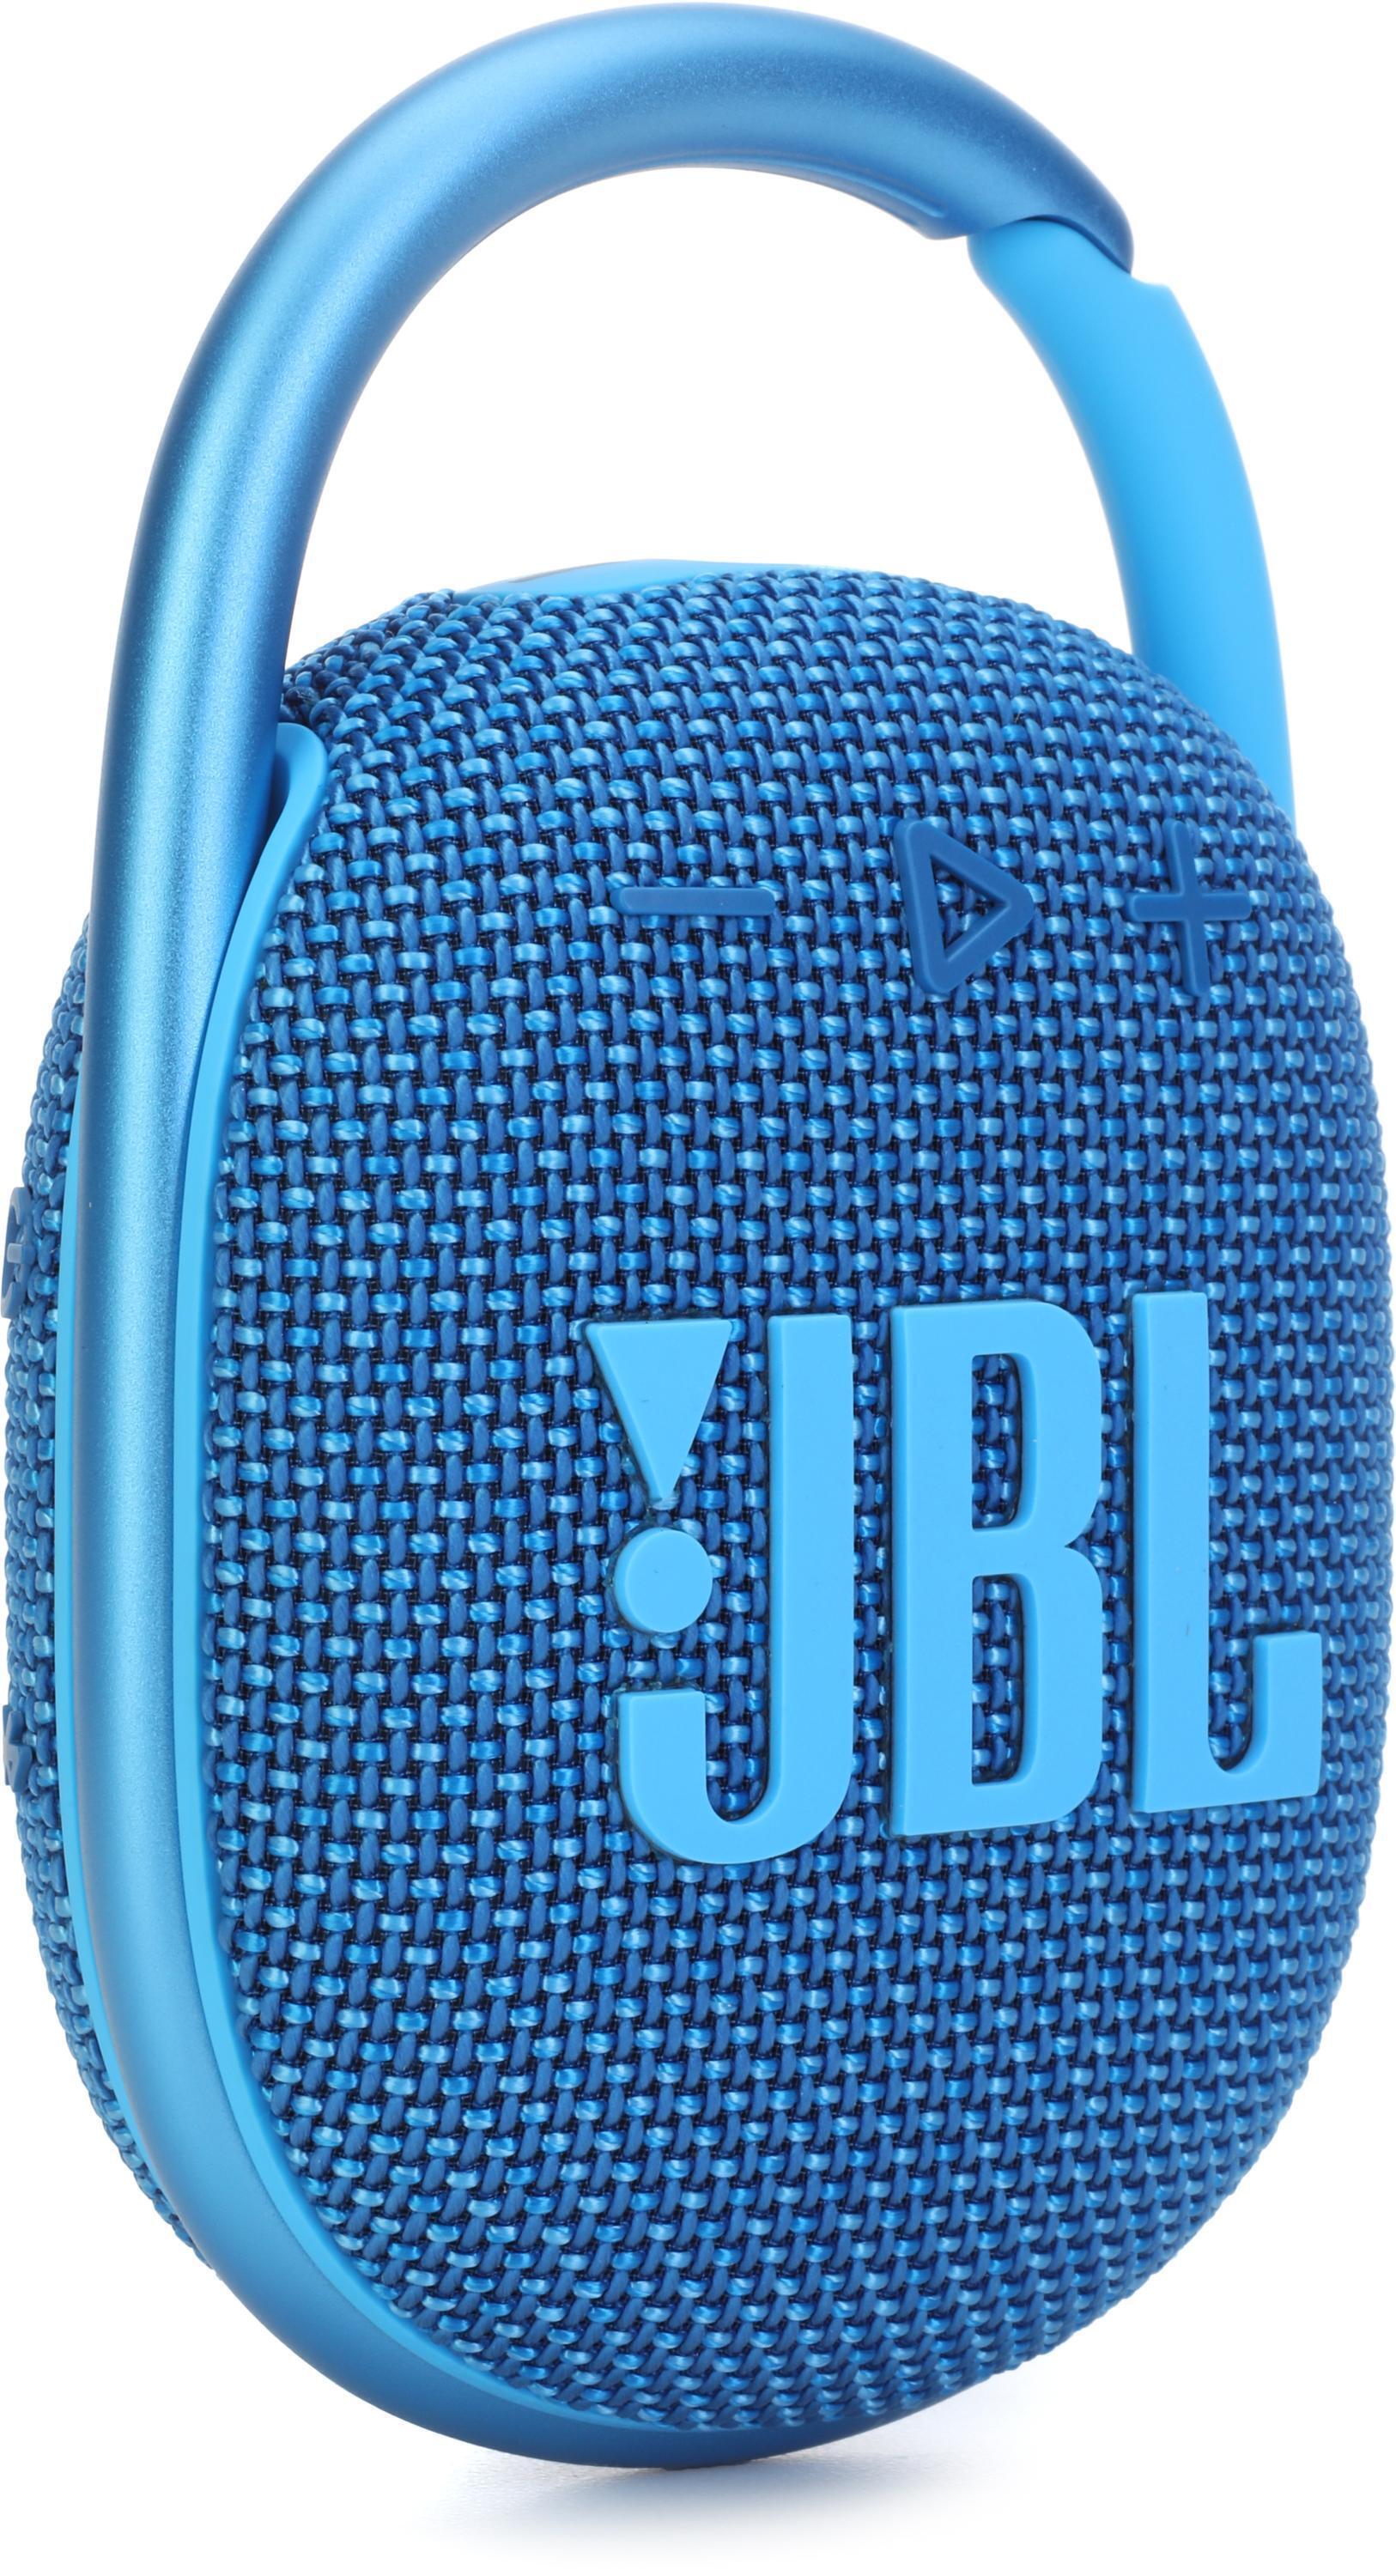 We have tested the JBL Clip 3 Bluetooth speakers! - Perfect Acoustic